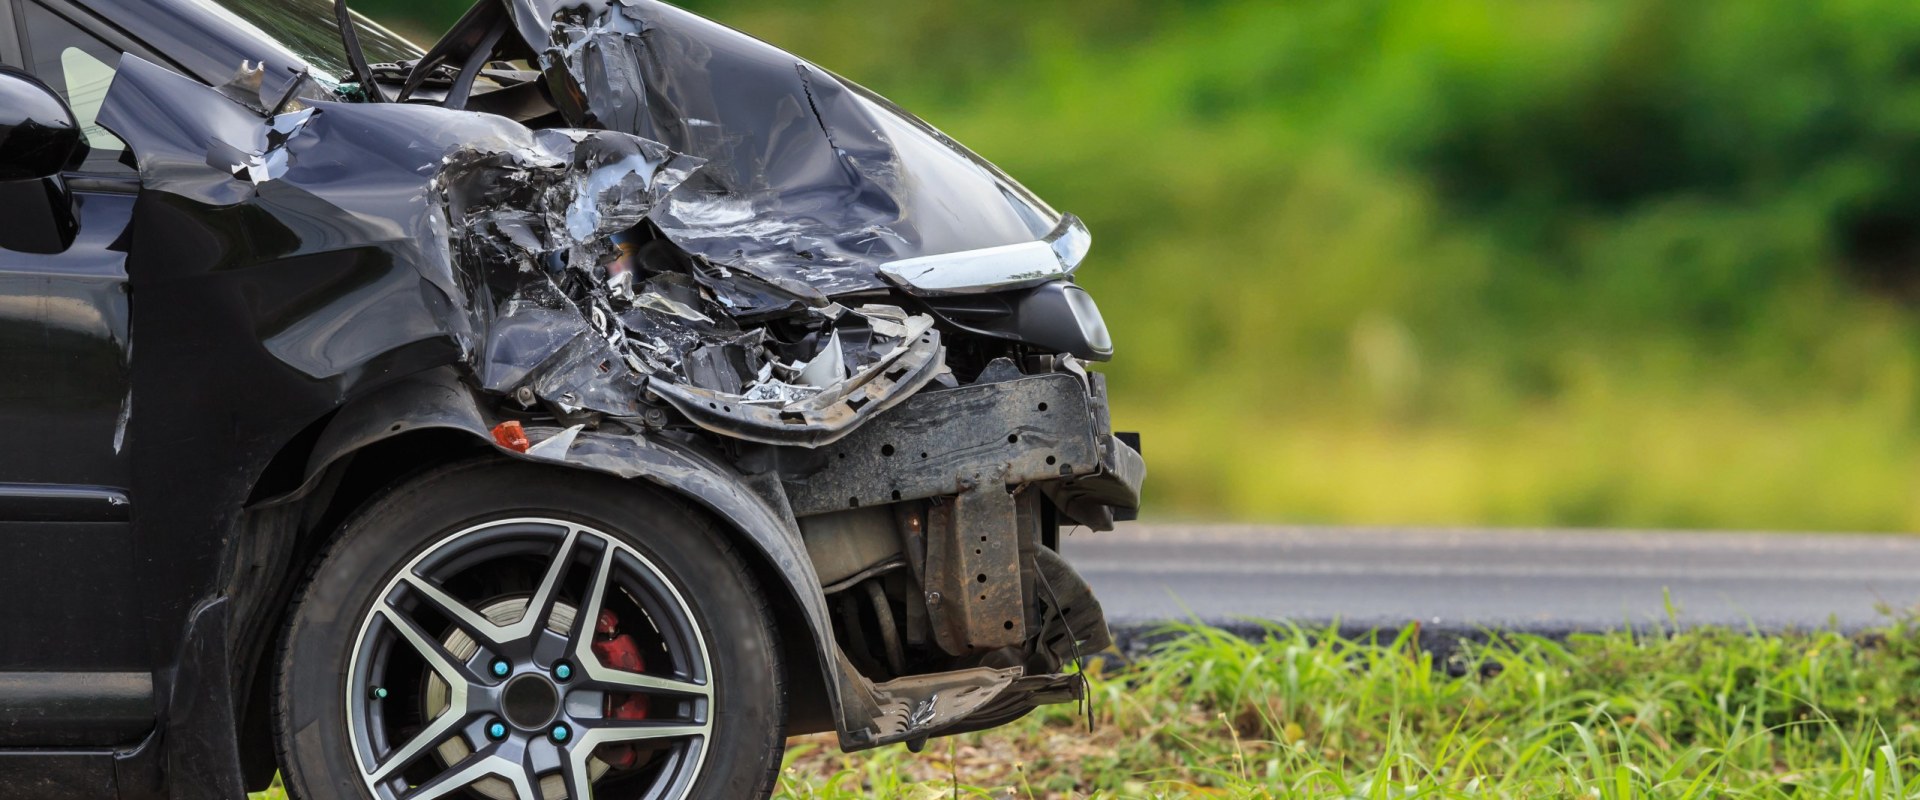 The Importance of Reporting a Minor Car Accident to the Police